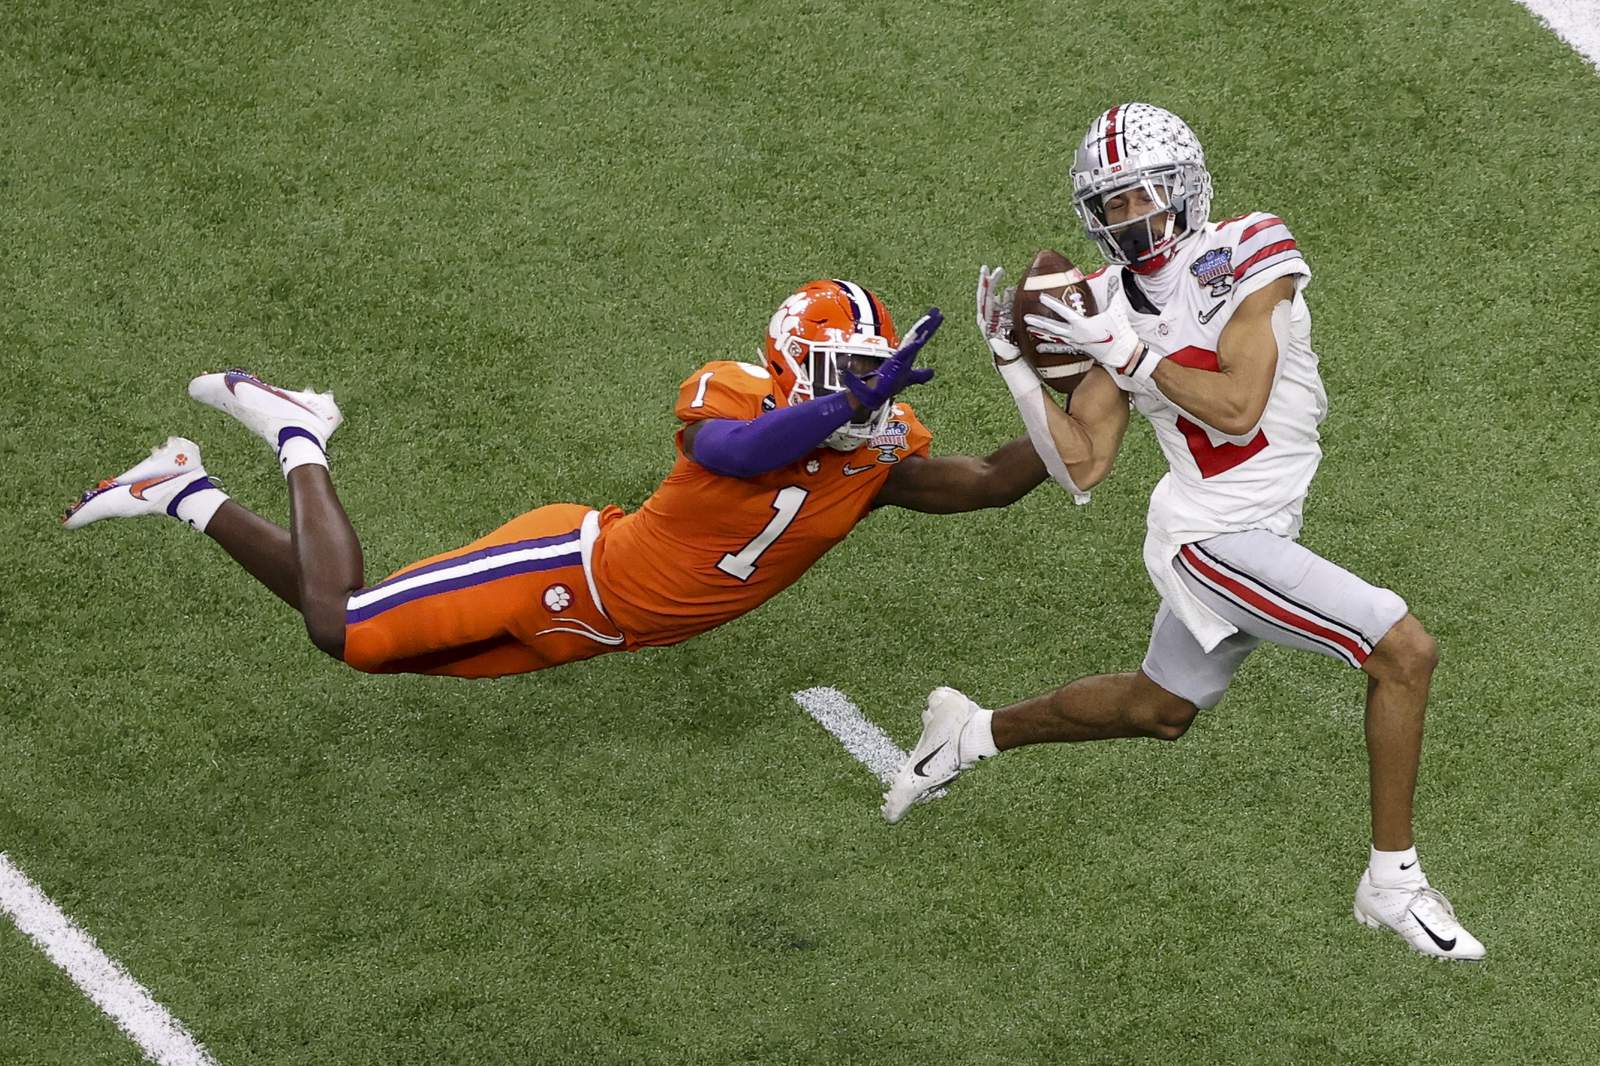 Fields' day: No. 3 Ohio State routs No. 2 Clemson 49-28